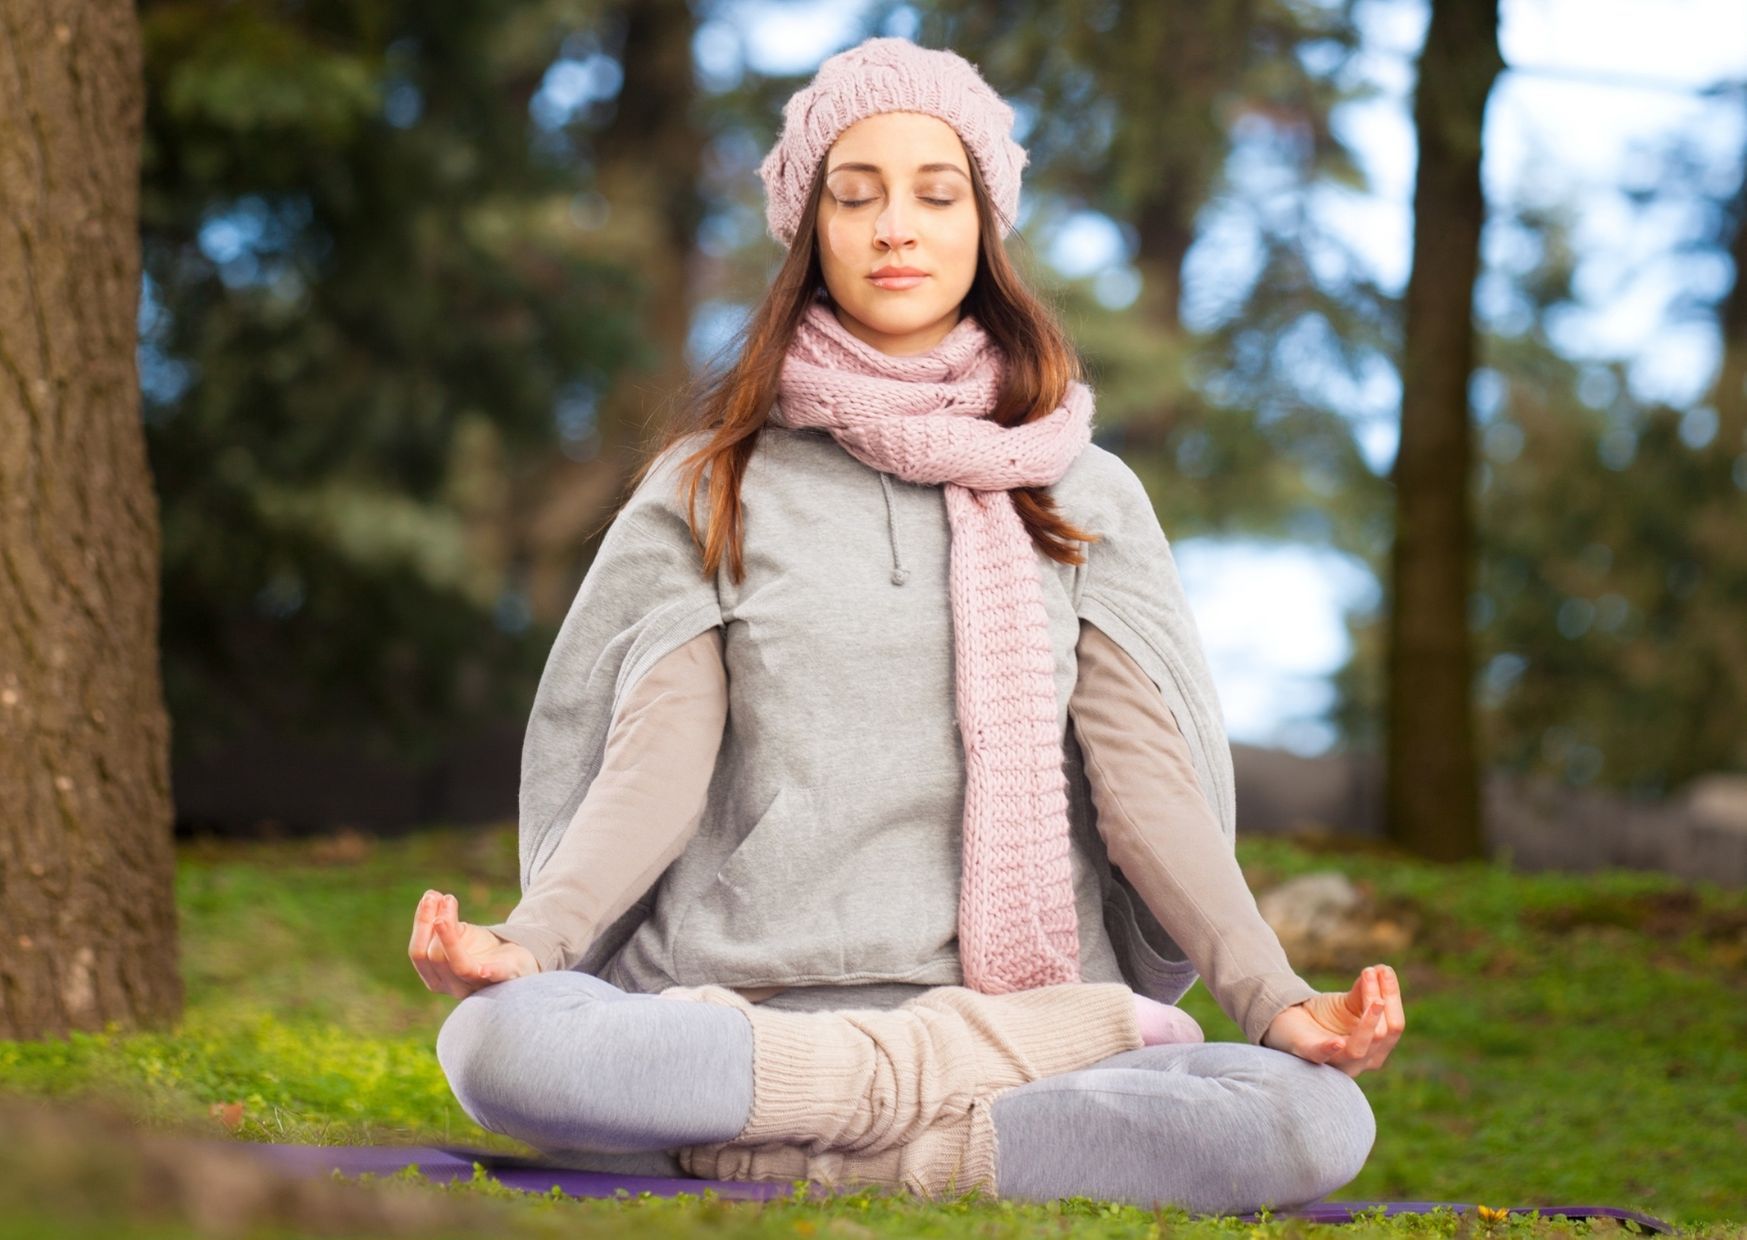 Differences Between Transcendental Meditation and the Other Types